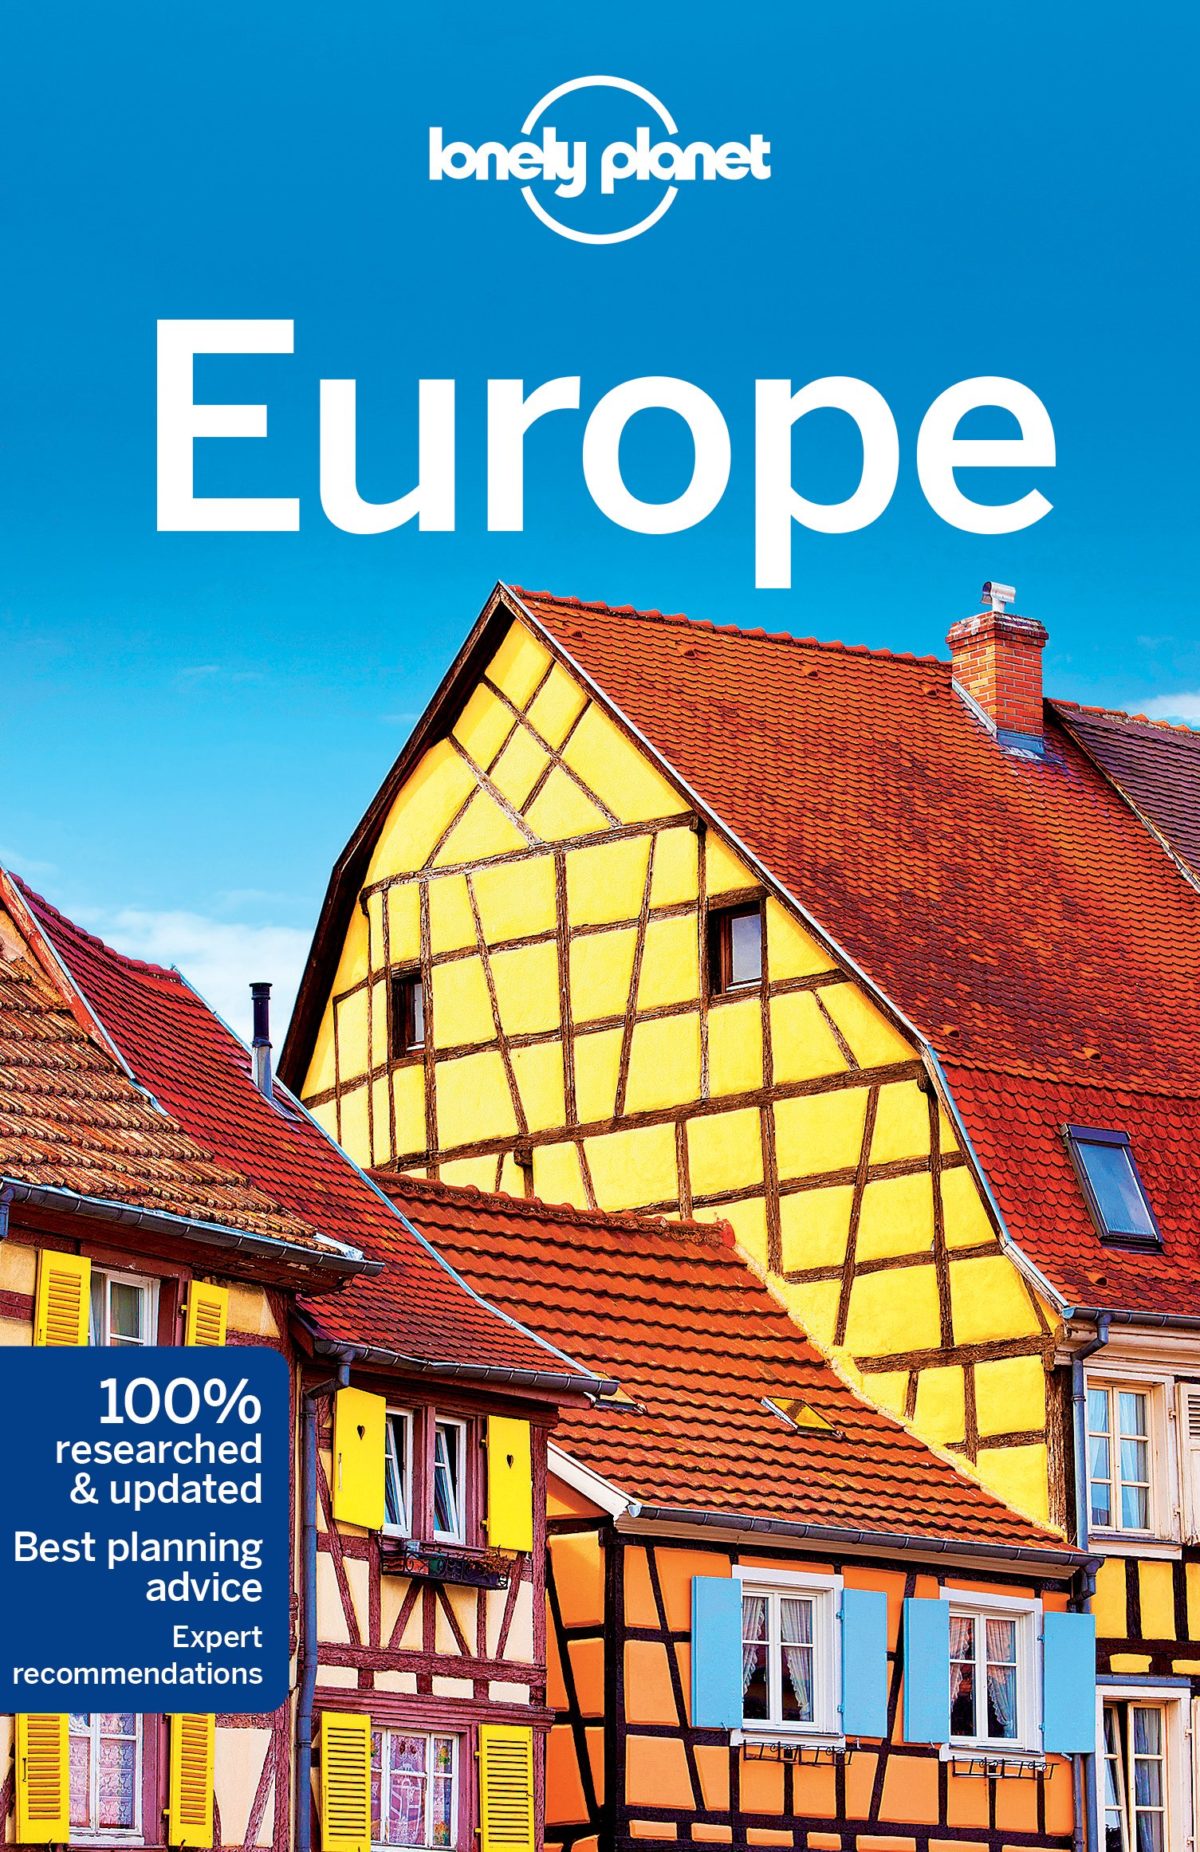 book travel to europe